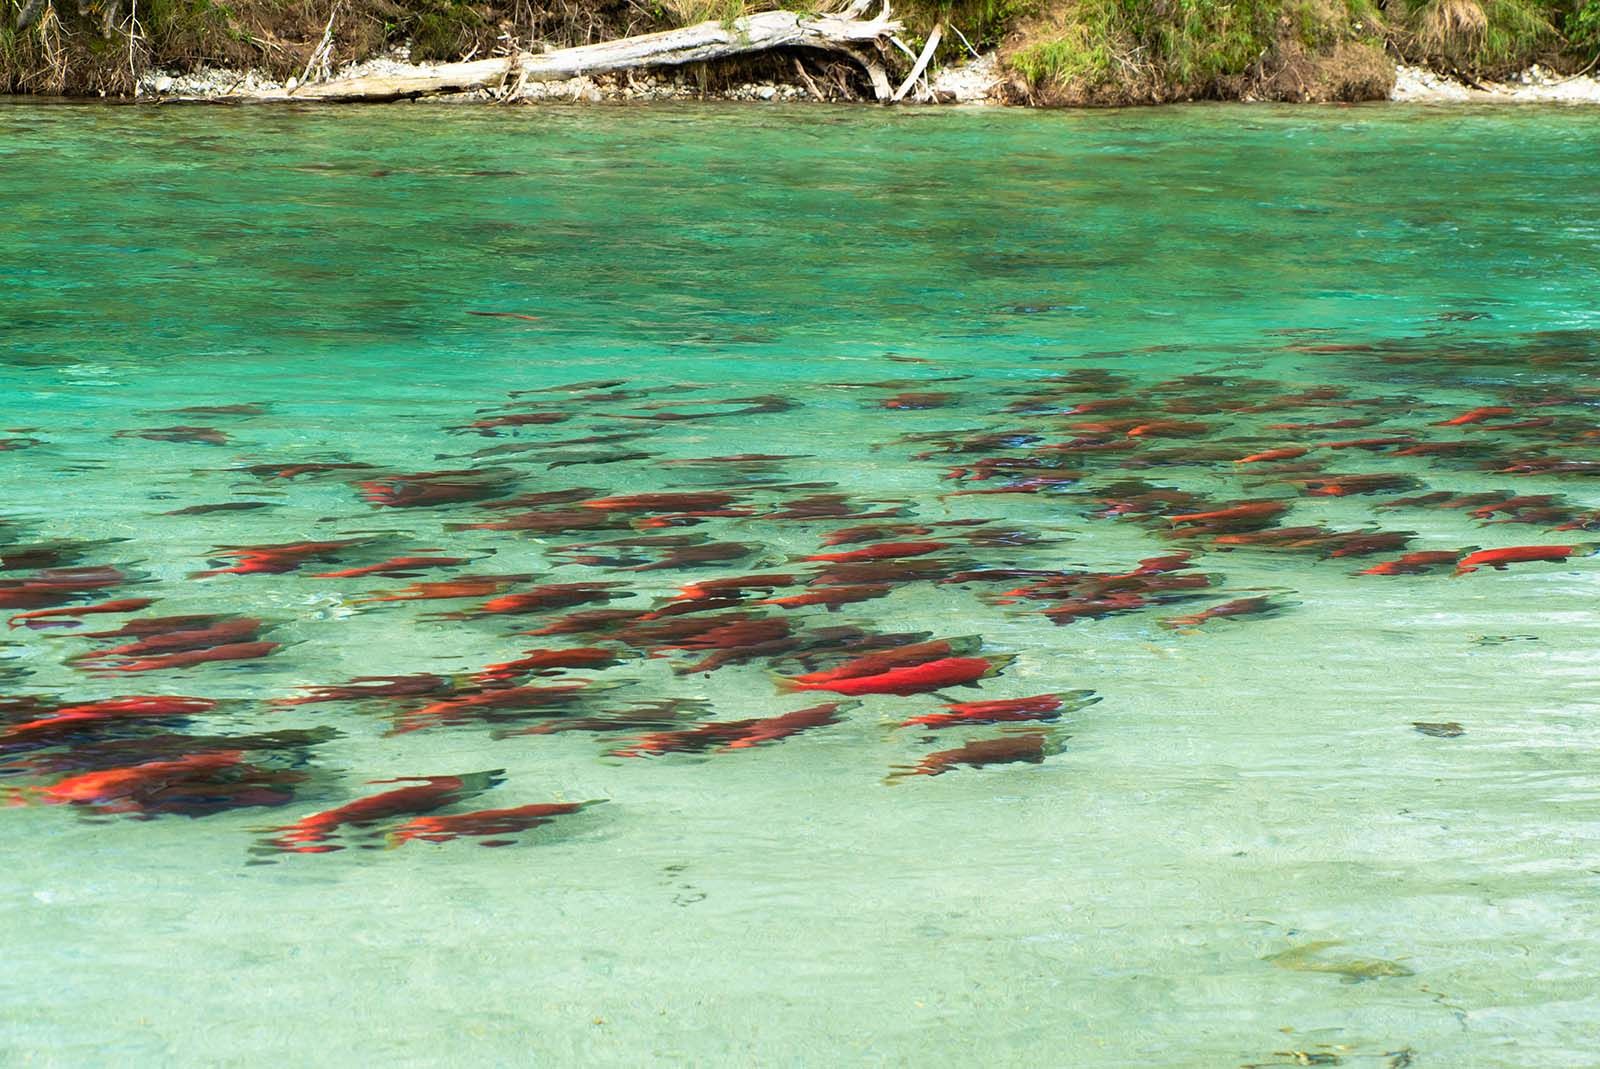 Thousands of Sockeye salmon in crystal clear water